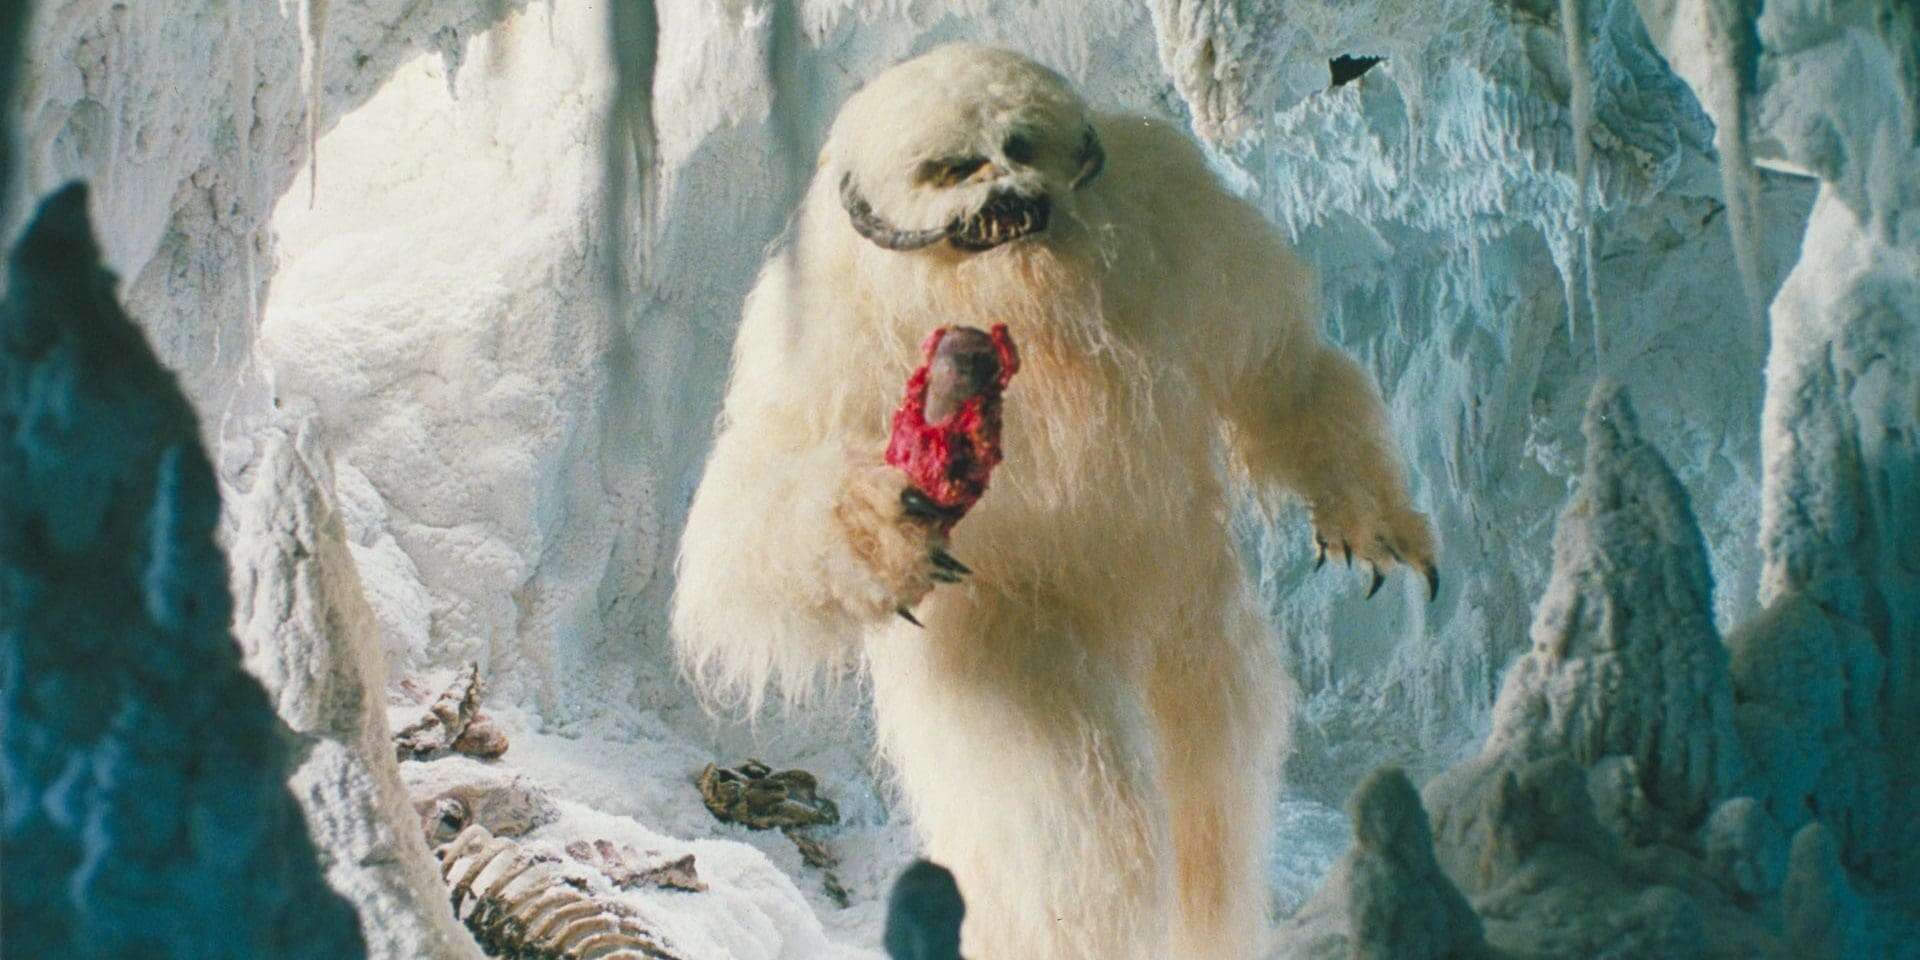 TIL that the scene of Luke attacked my a Wampa on Hoth was added